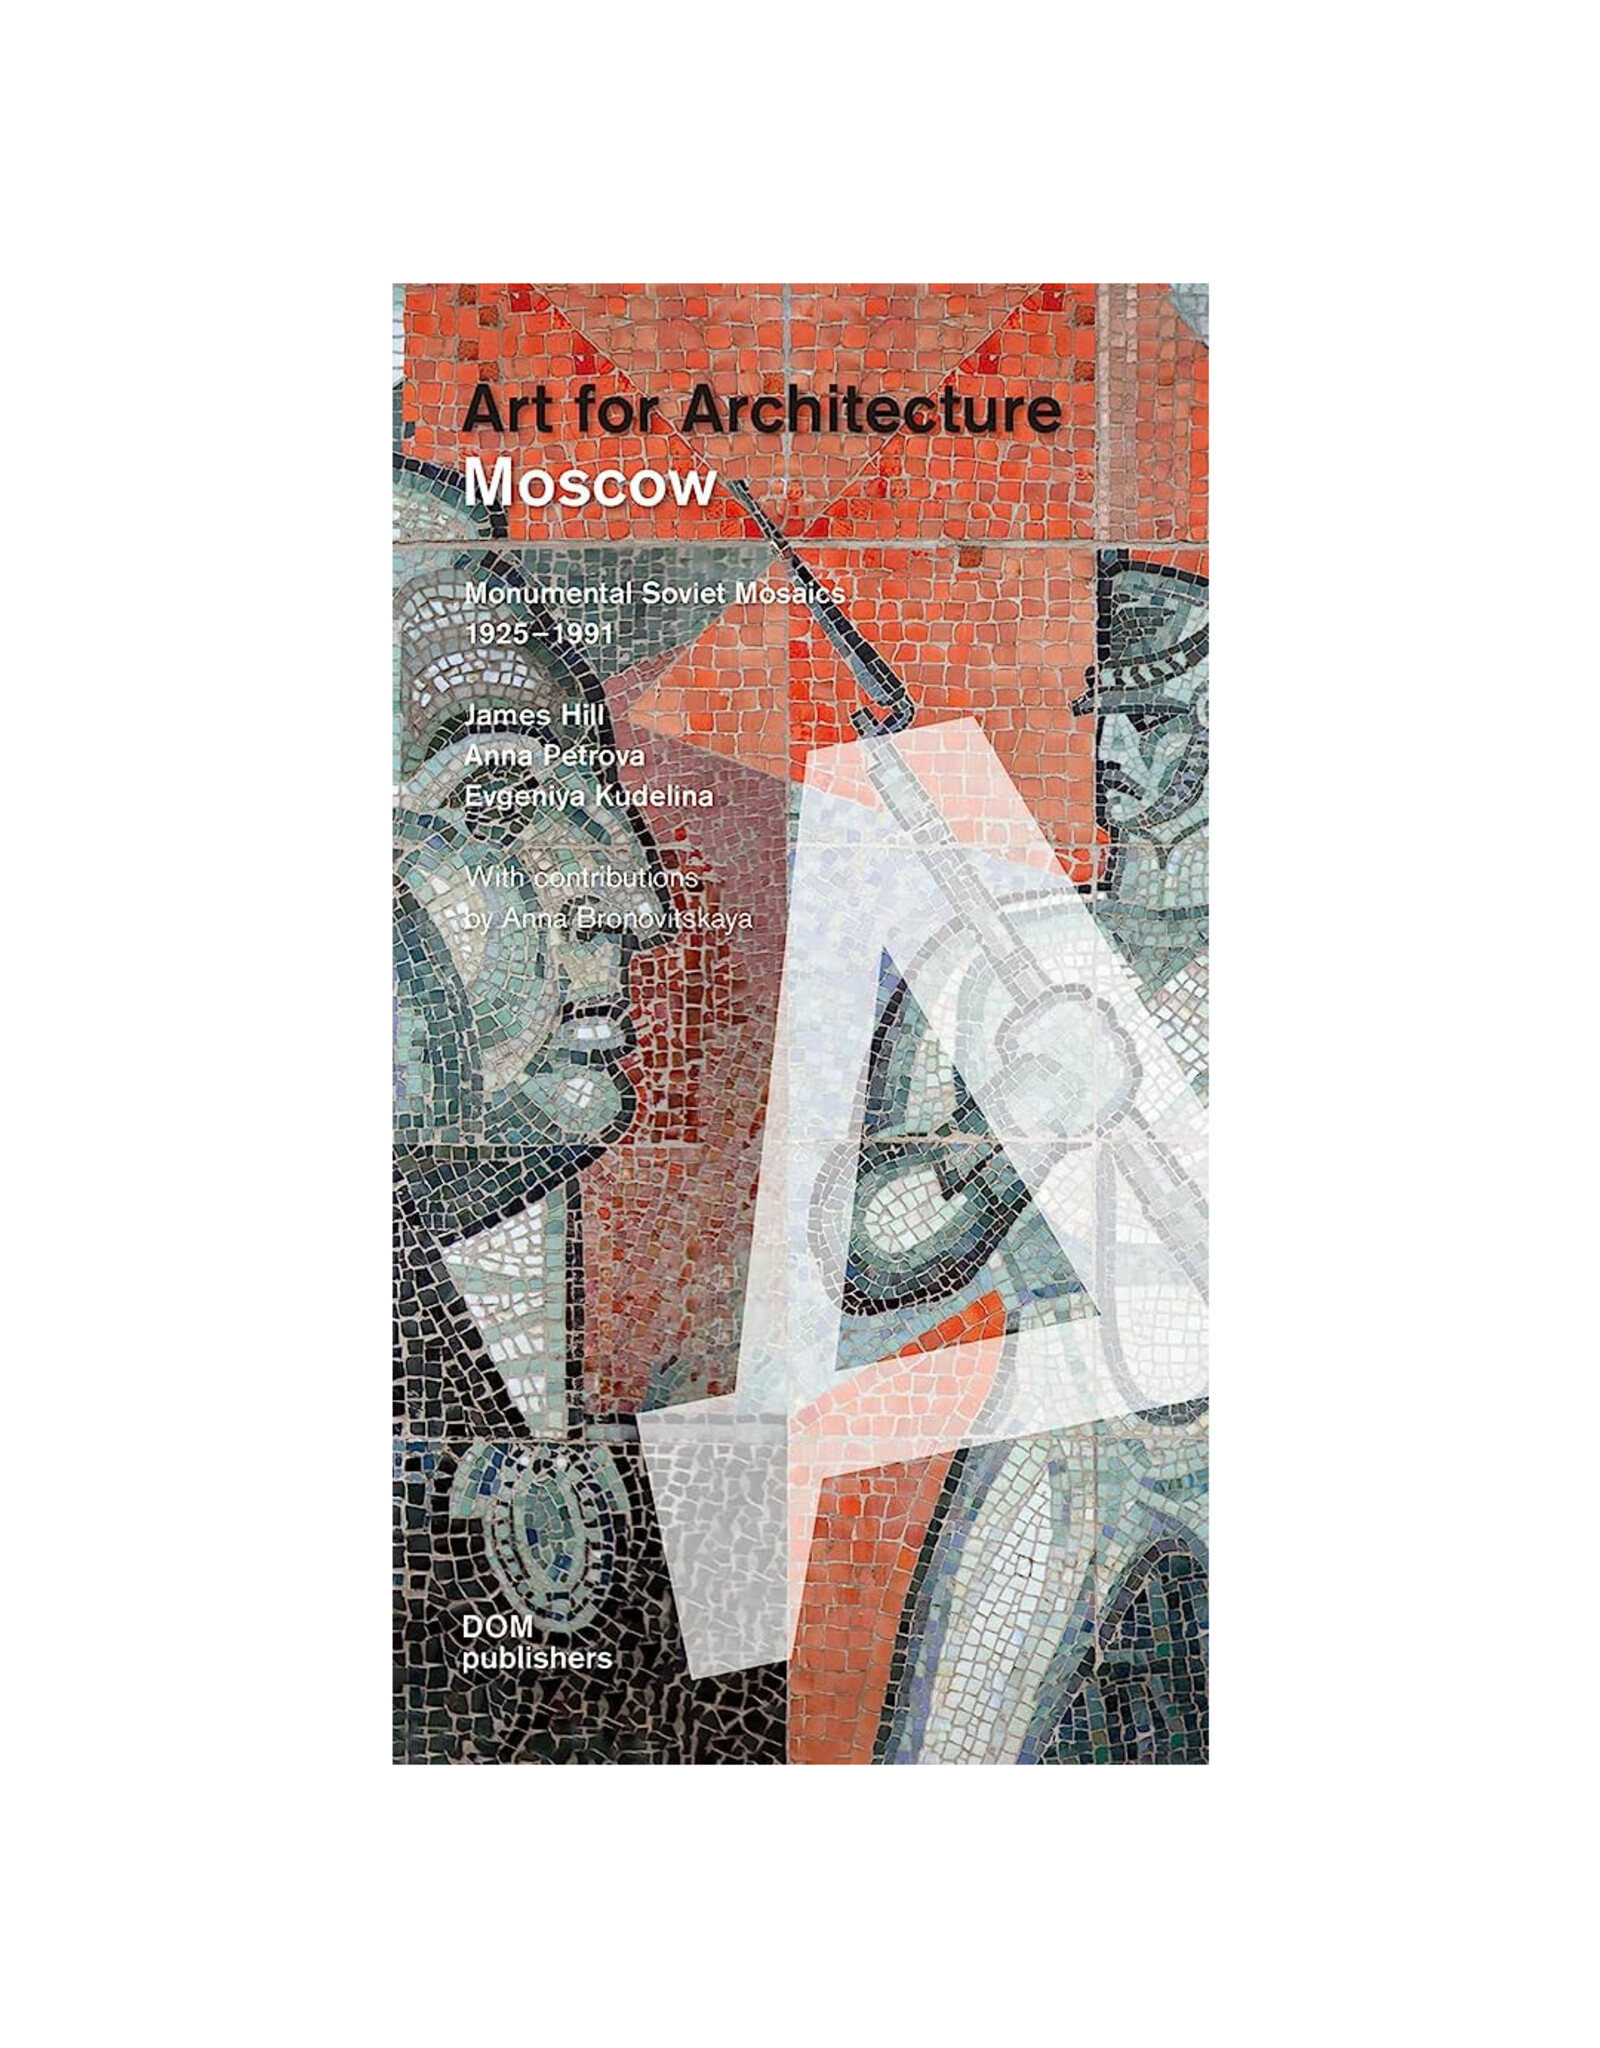 Moscow: Art for Architecture : Soviet Mosaics from 1935 to 1990